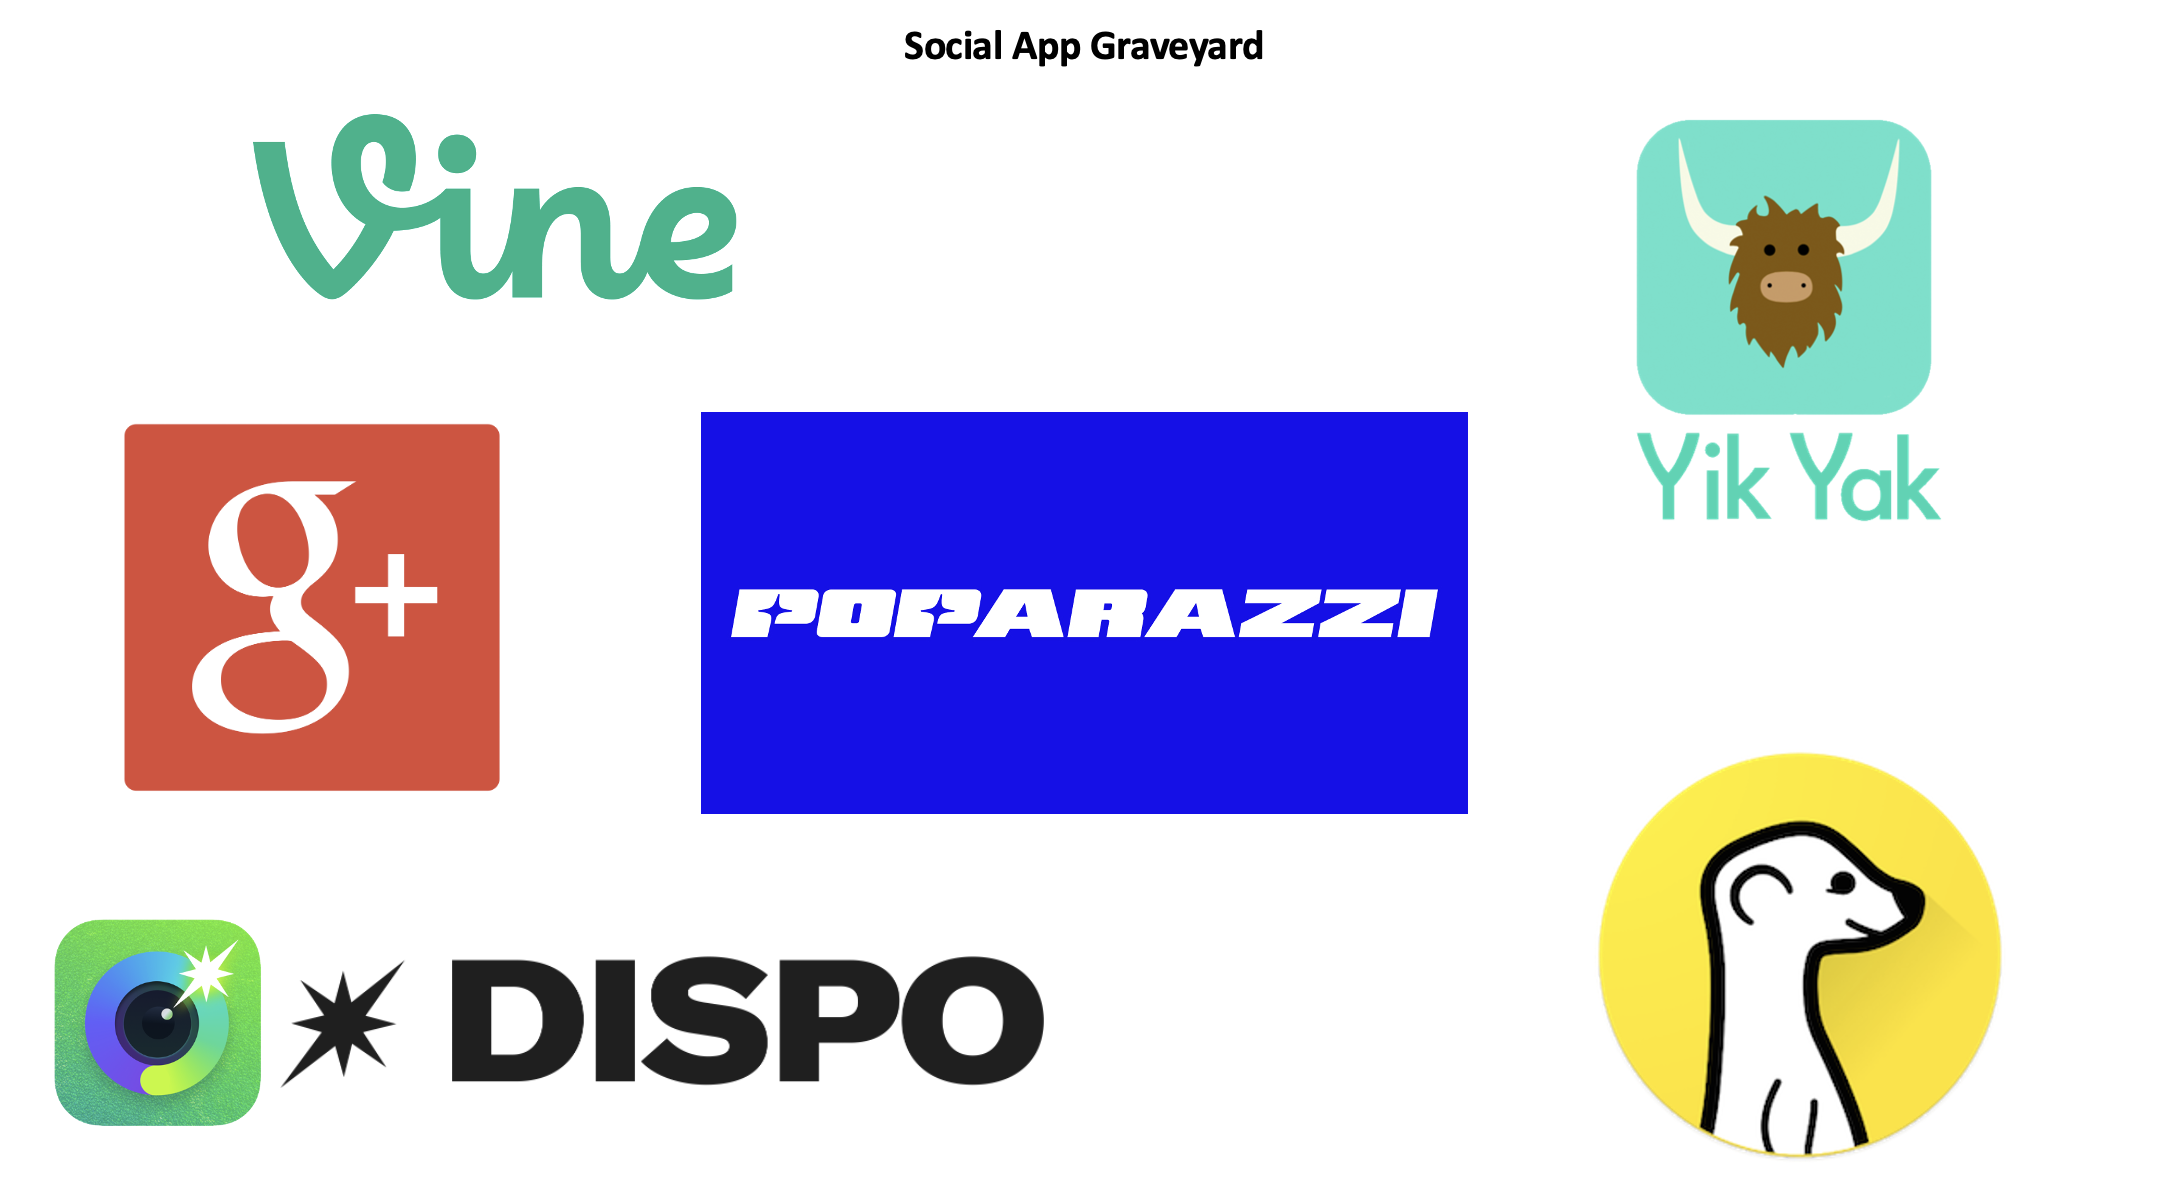 A few choice social products that came and went, failing to stick around in the public Zeitgeist long-term (fingers crossed Vine - which is owned by Twitter - makes a revival some day)